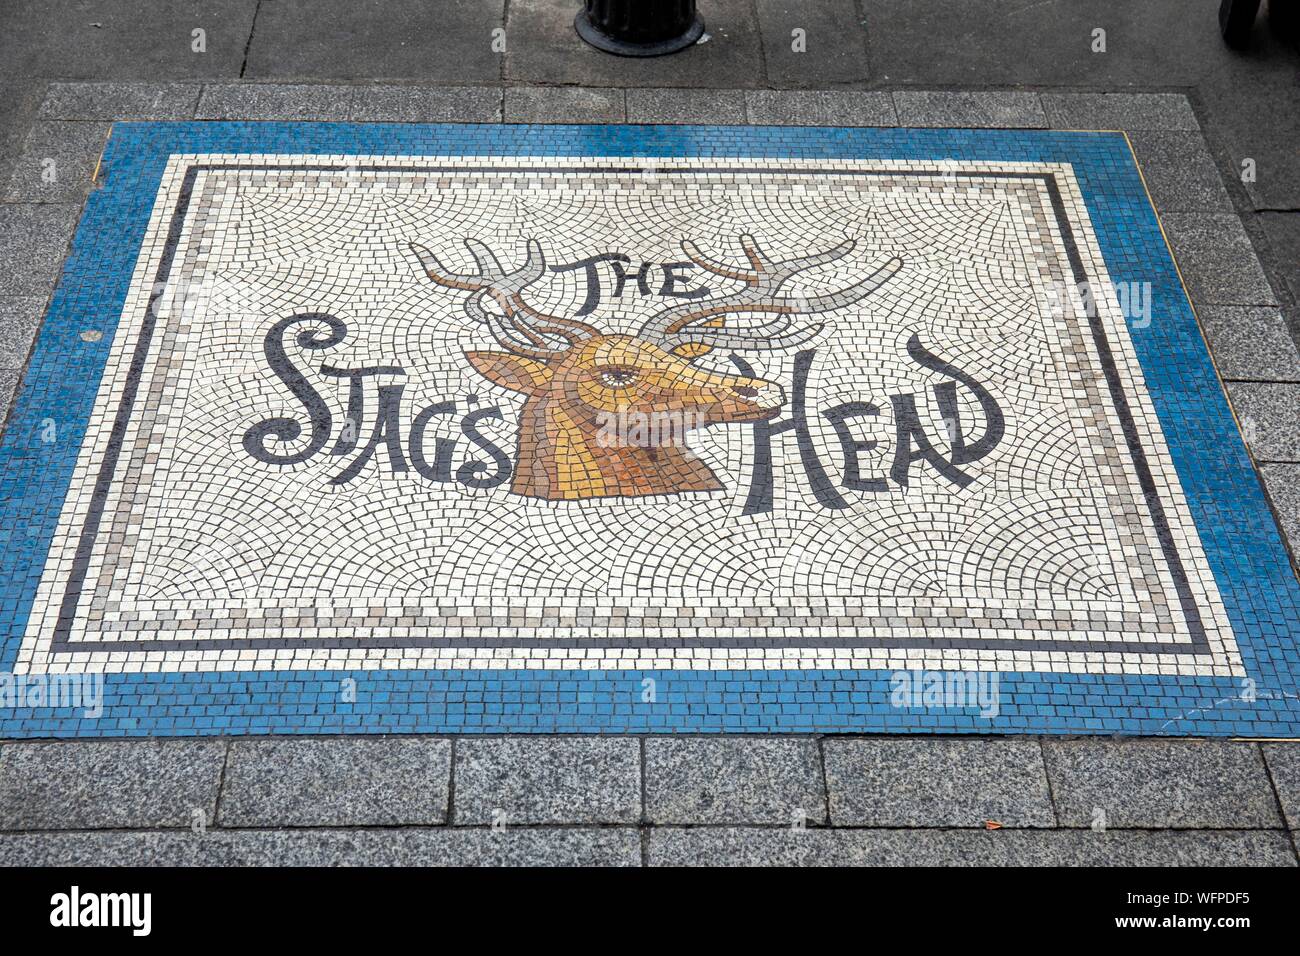 Ireland, Dublin, Stag's Head a pub located at the corner of Lady Court and Lady Lane, mosaic Stock Photo